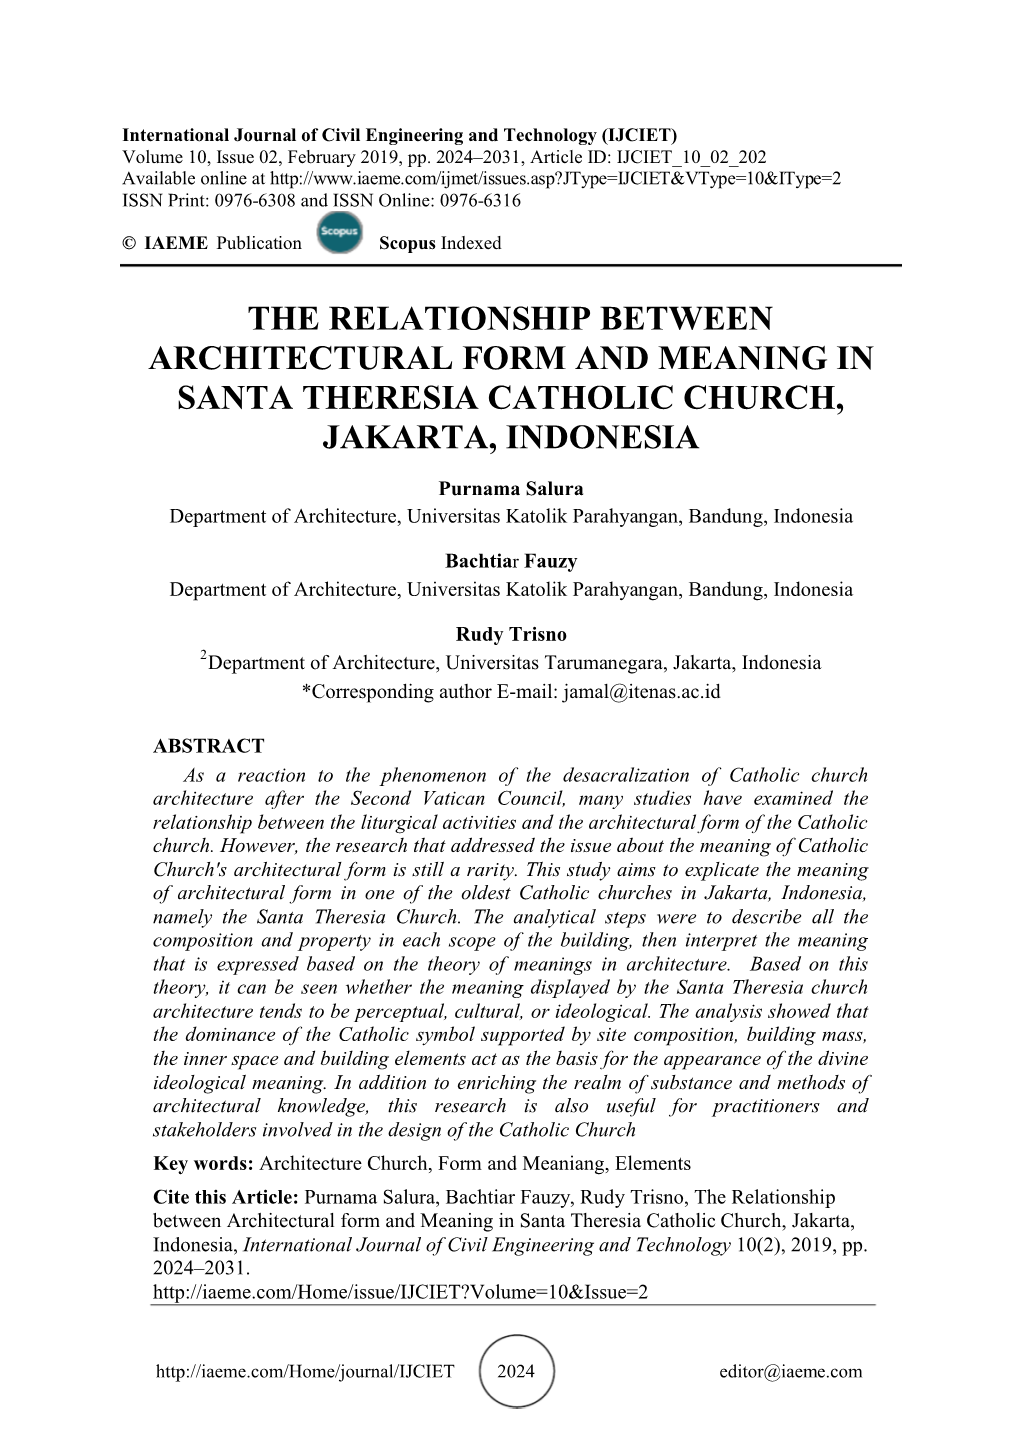 The Relationship Between Architectural Form and Meaning in Santa Theresia Catholic Church, Jakarta, Indonesia